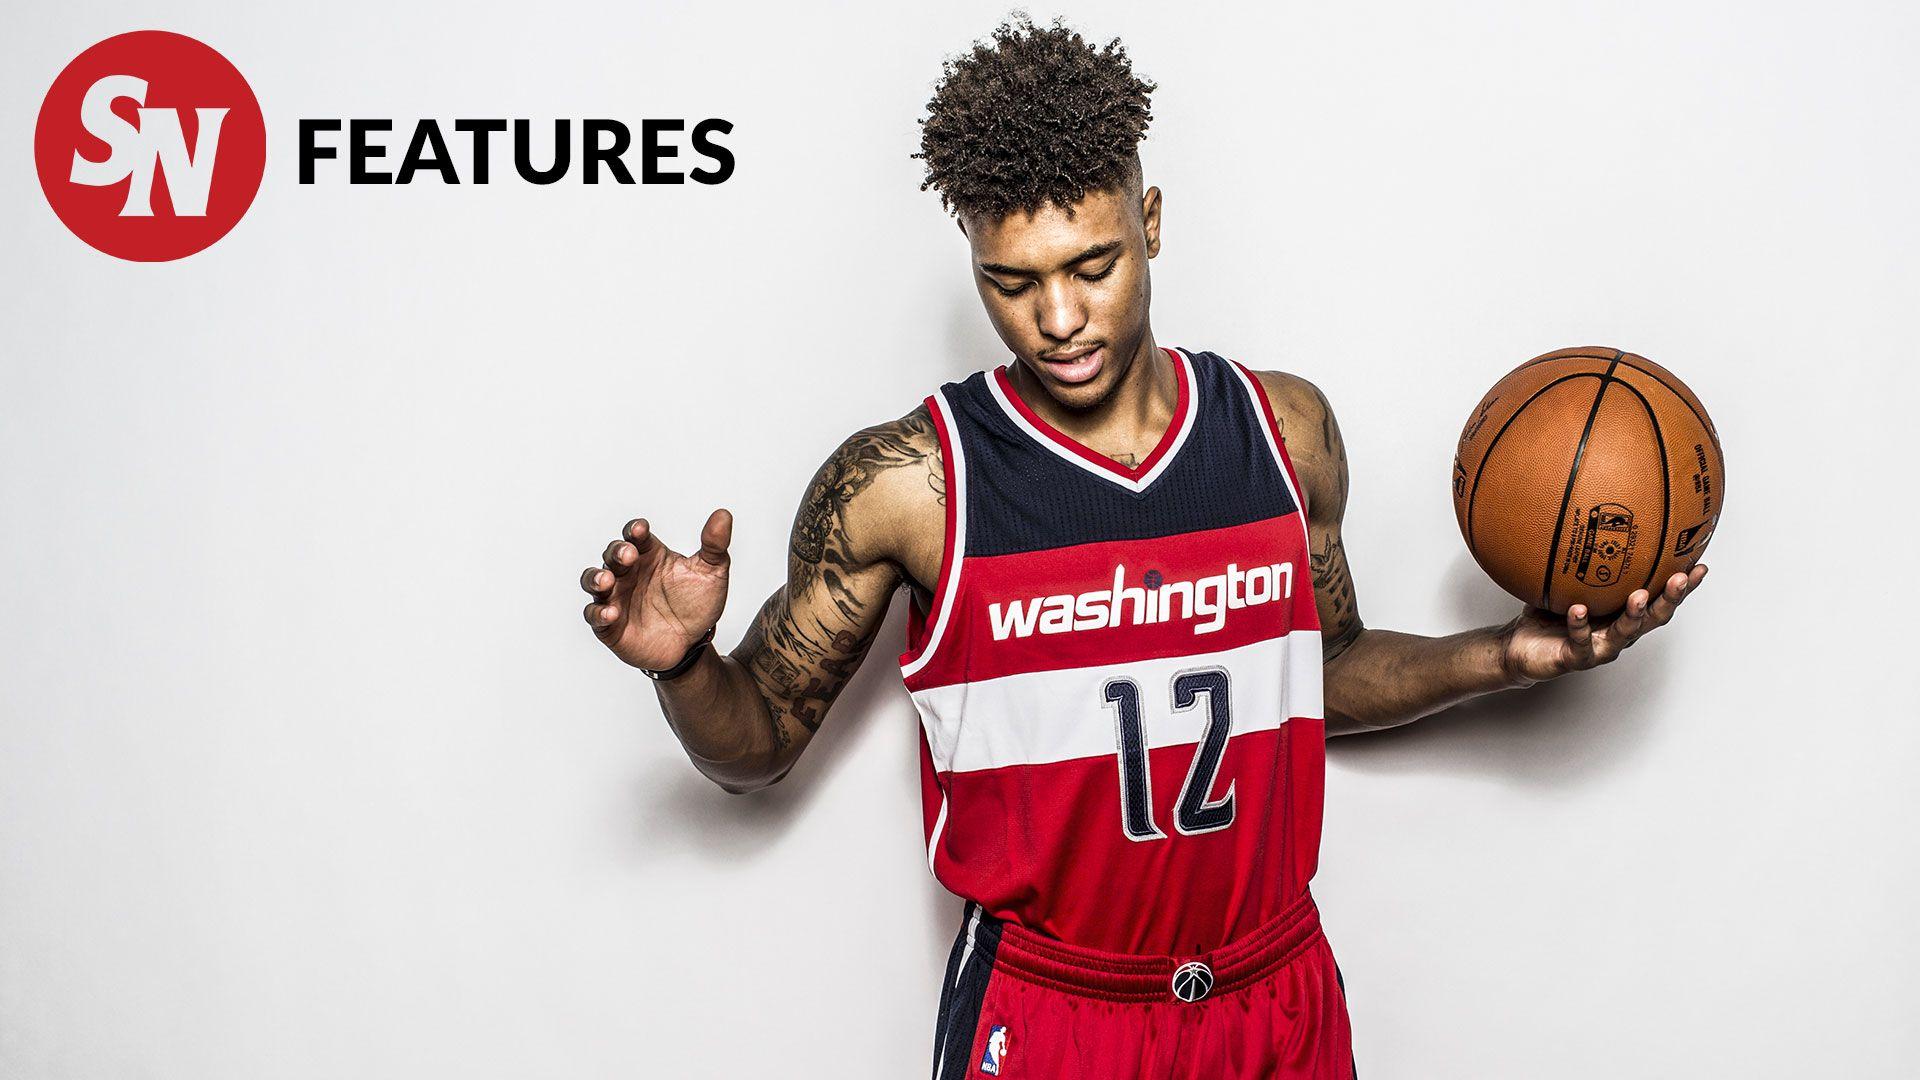 Wizards rookie Kelly Oubre fled during Hurricane Katrina, but New